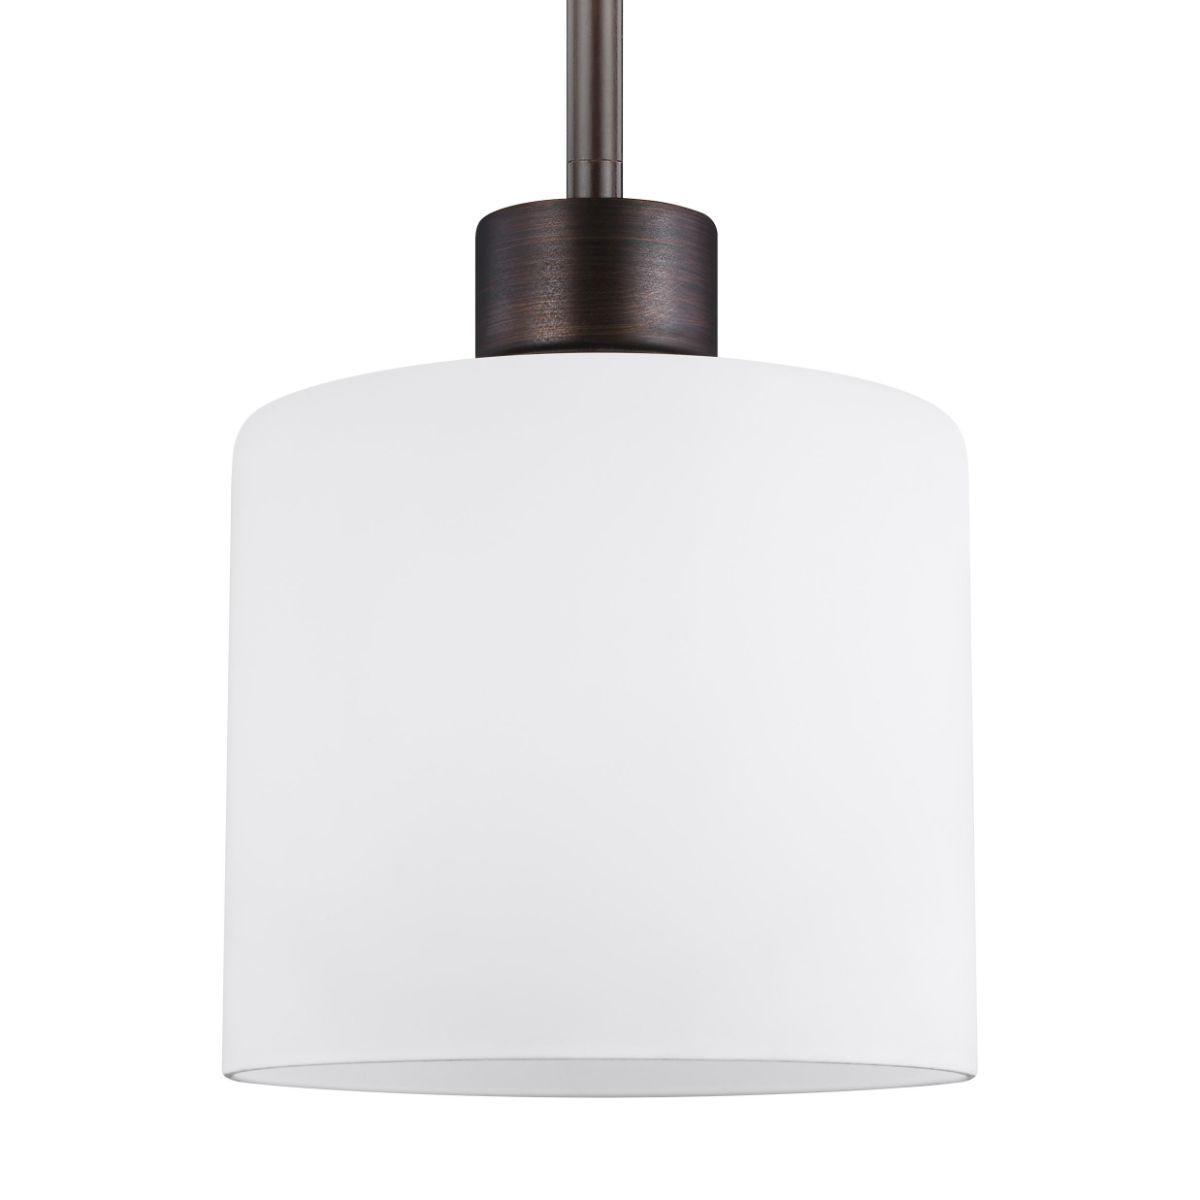 Canfield 6 in. Pendant Light